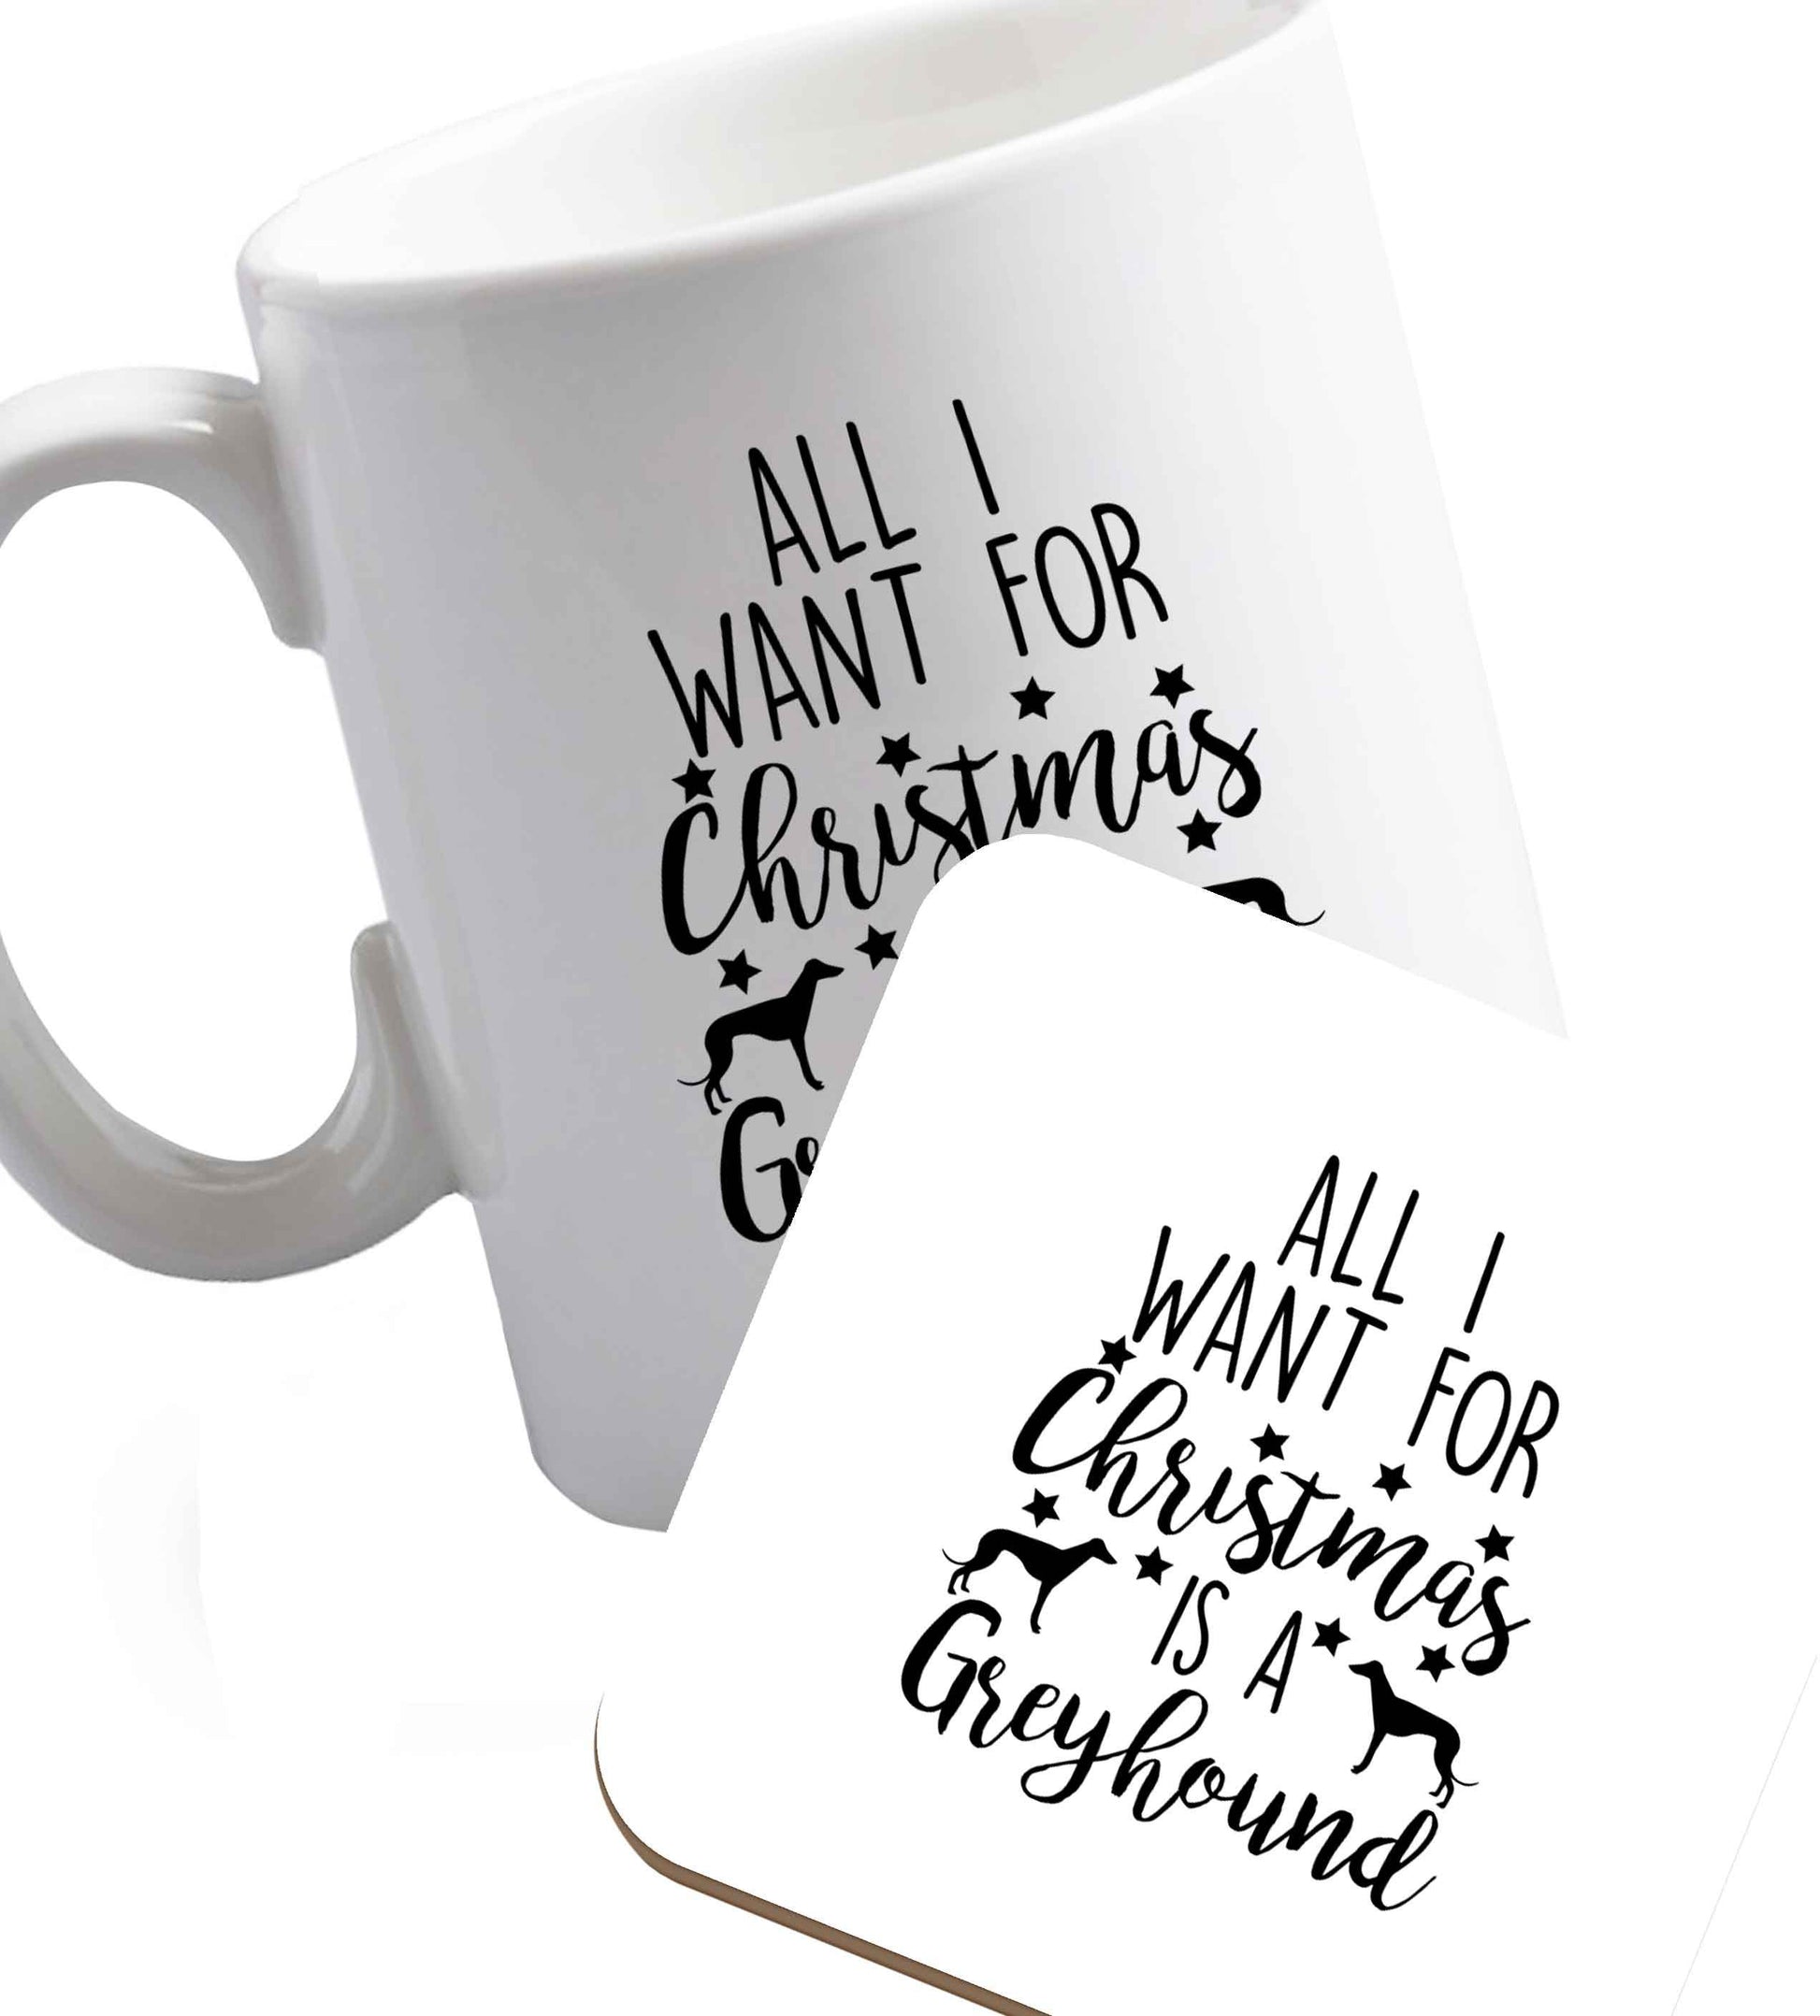 10 oz All I want for Christmas is a greyhound ceramic mug and coaster set right handed